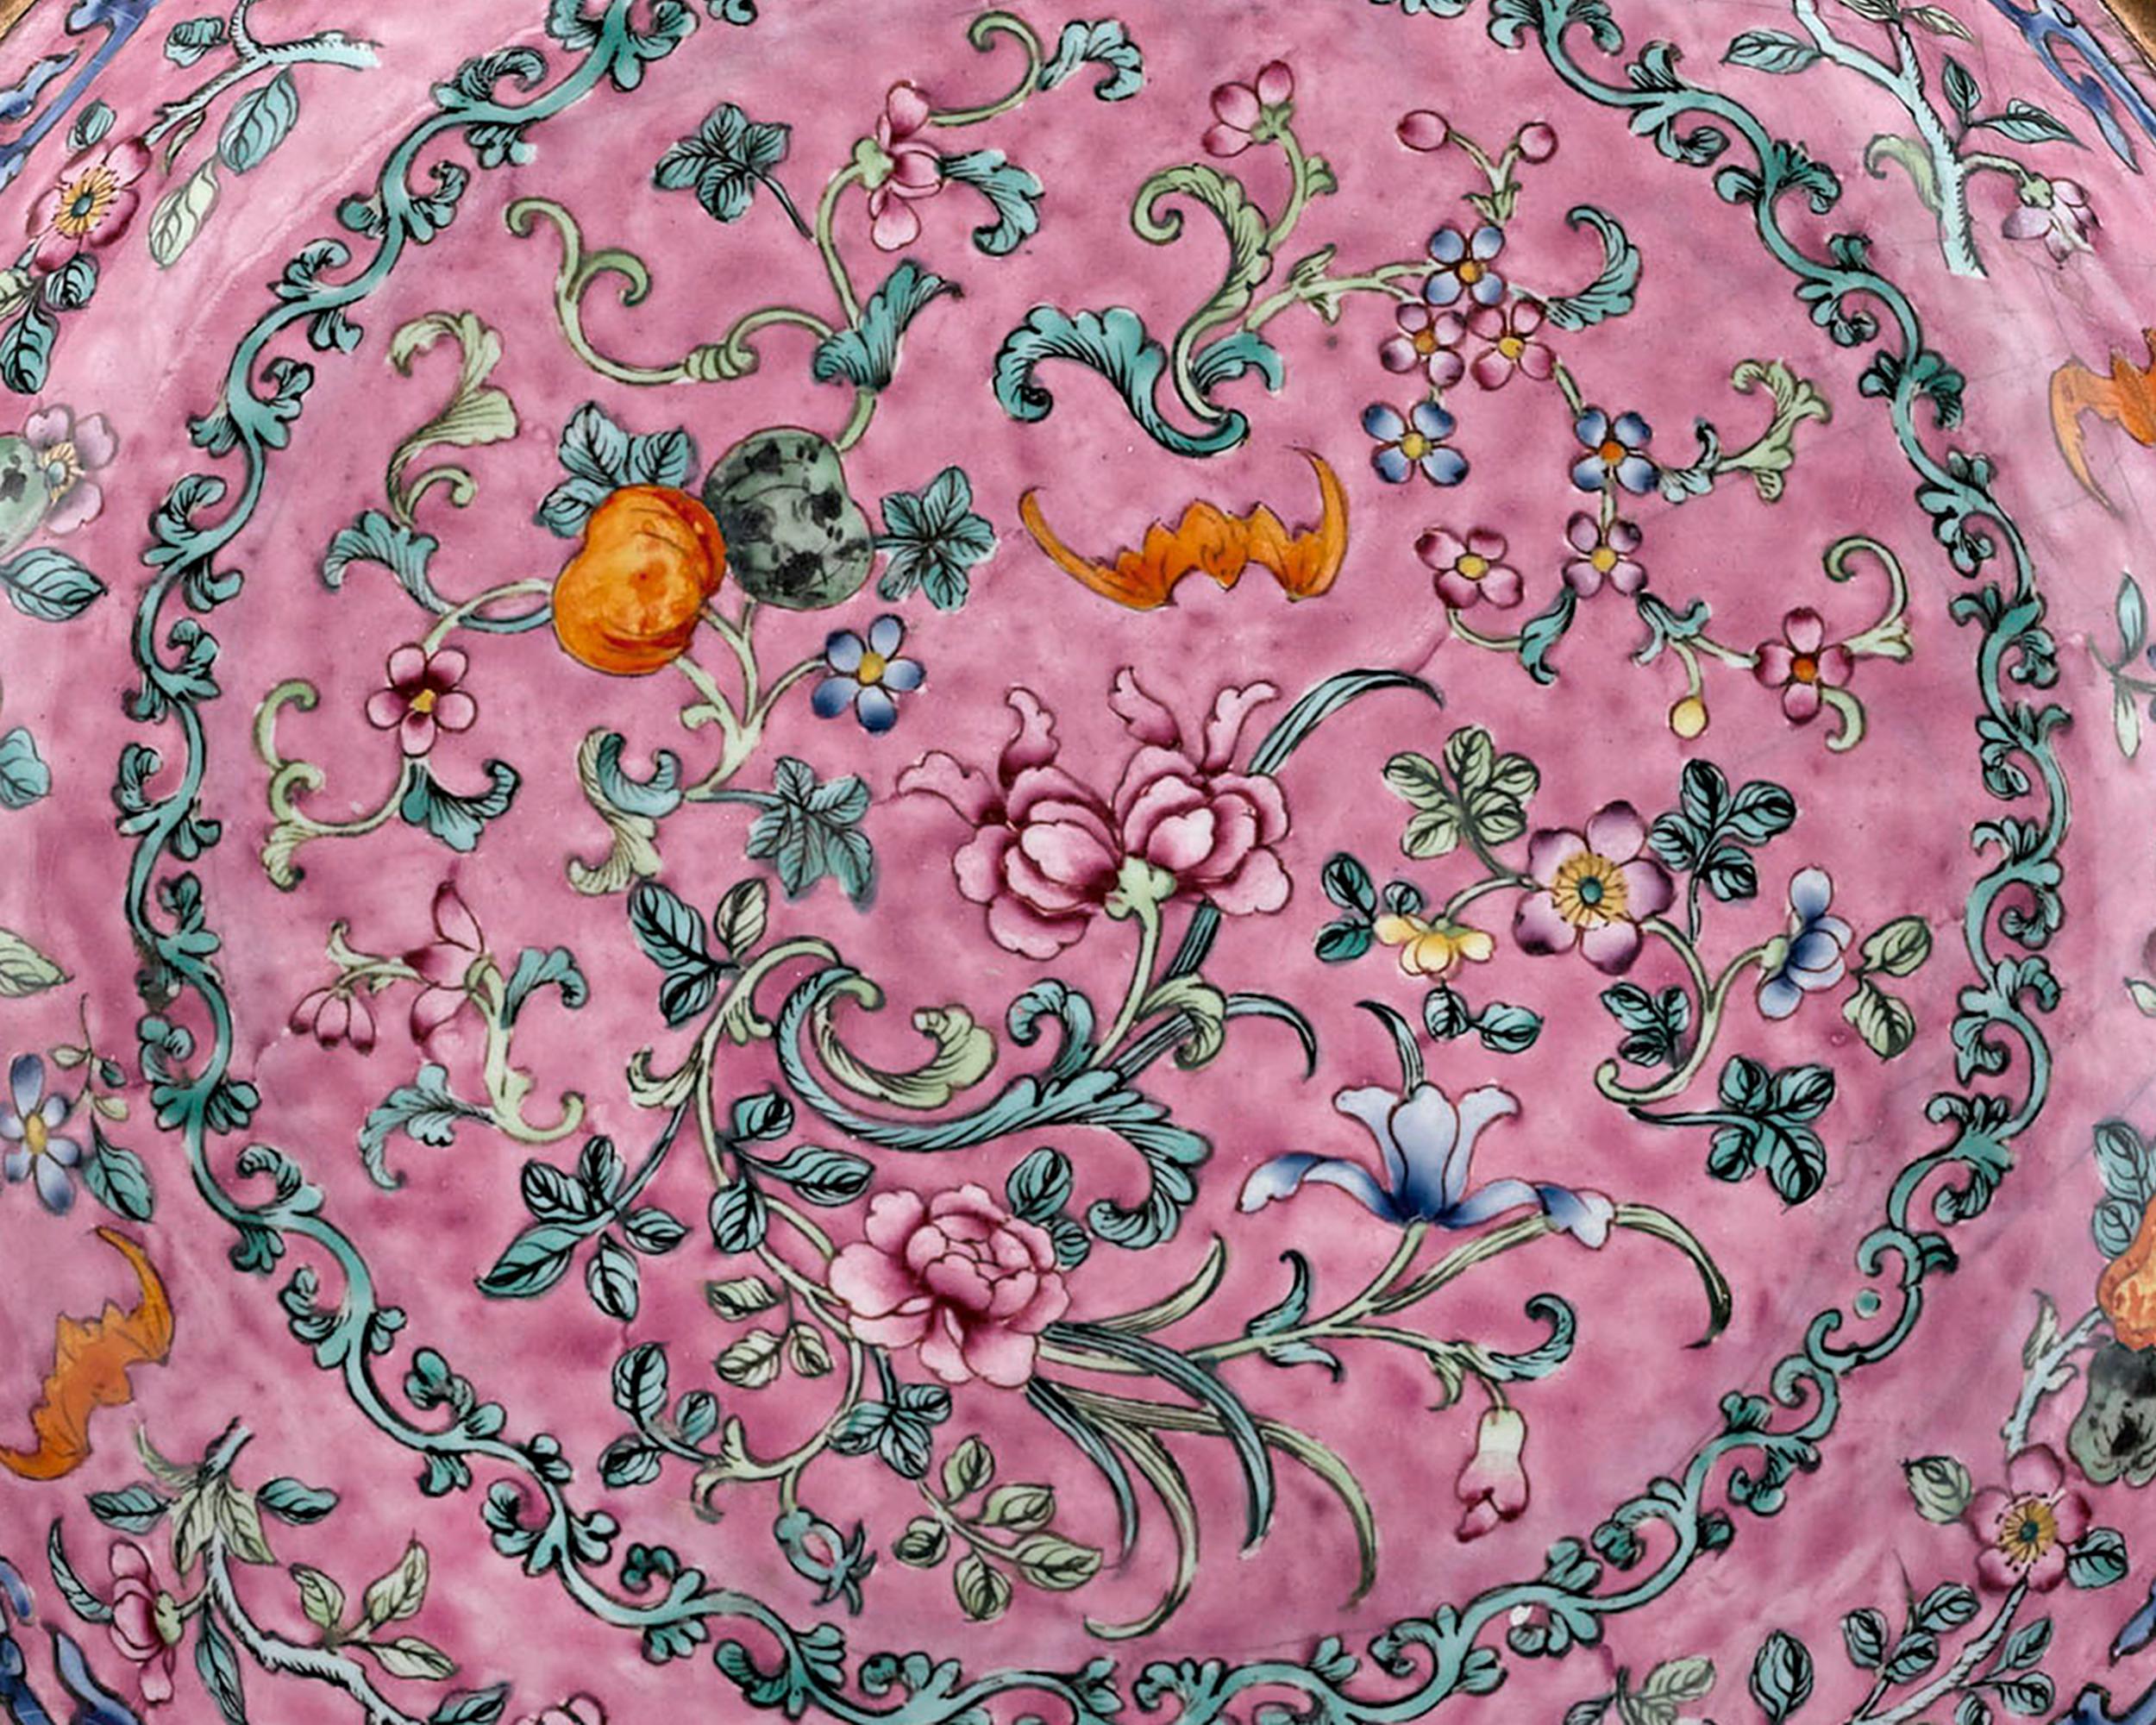 This enchanting Chinese plate, known as Canton enamel, evokes the intrigue and exclusivity of the 18th- century Imperial court. Boasting a magnificent famille rose background hue, this plate is adorned with a sophisticated floral design of